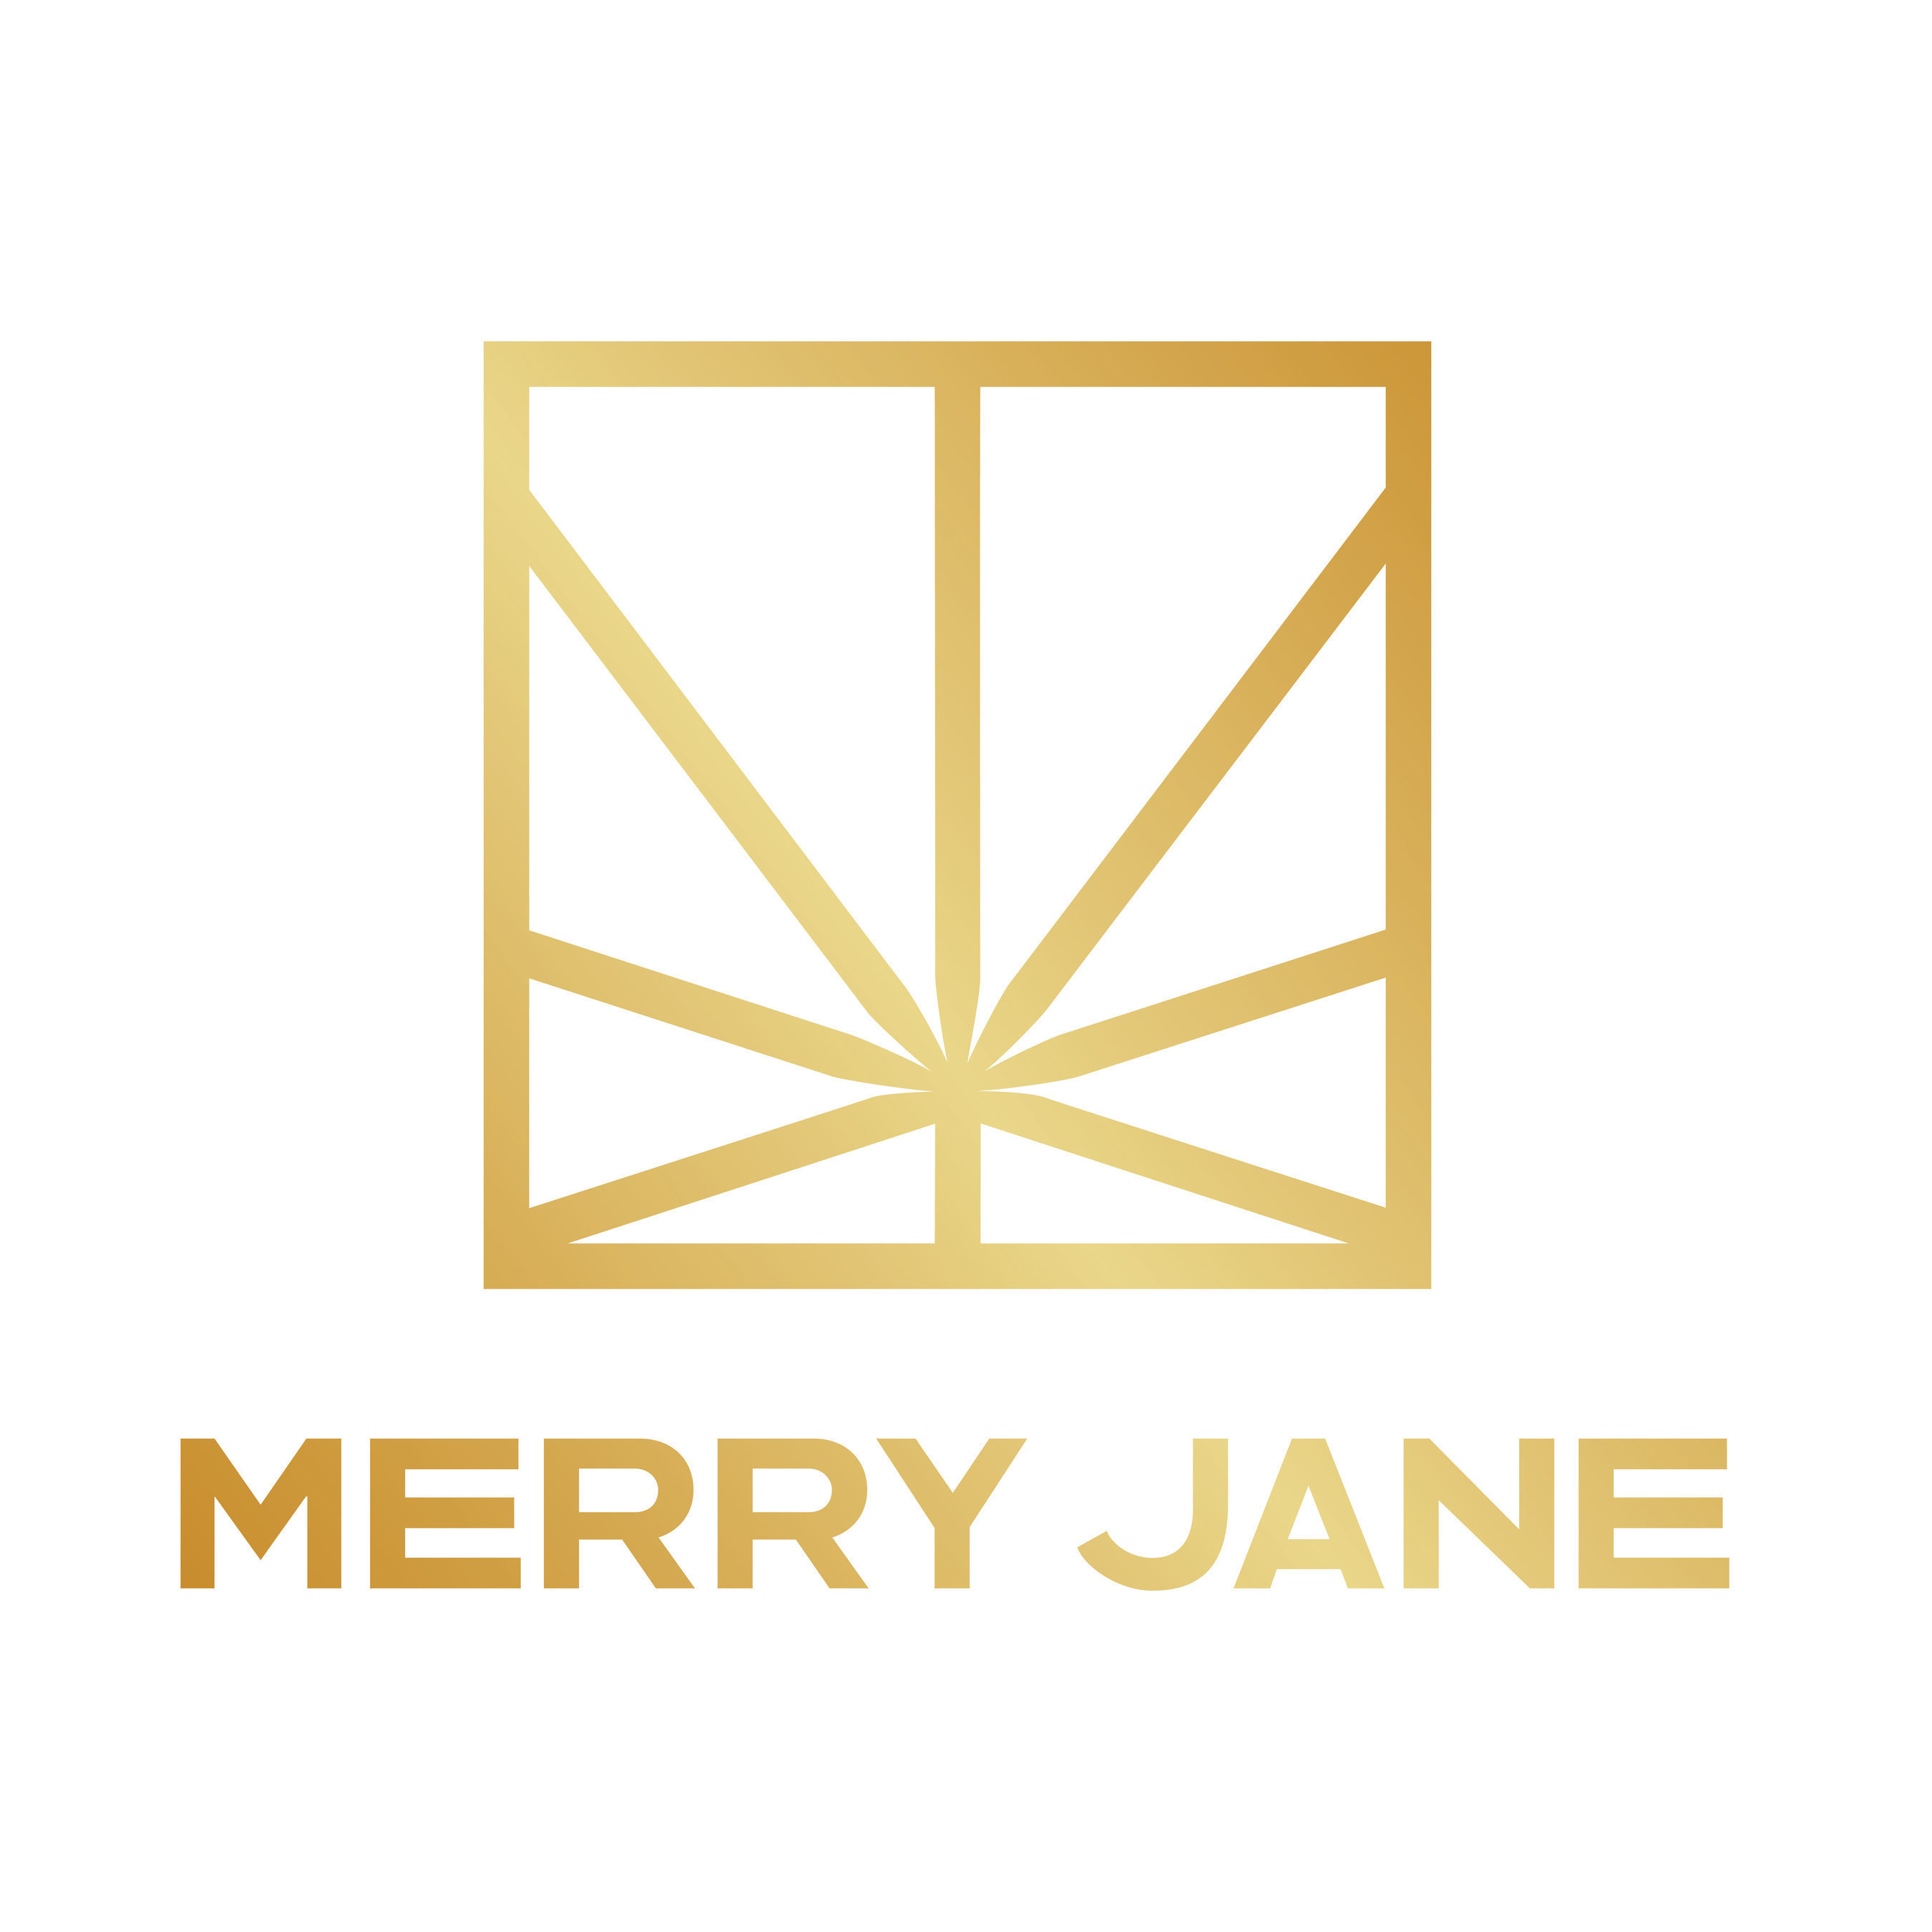 MERRY JANE To Serve As Executive Producers Of MTV's New Series